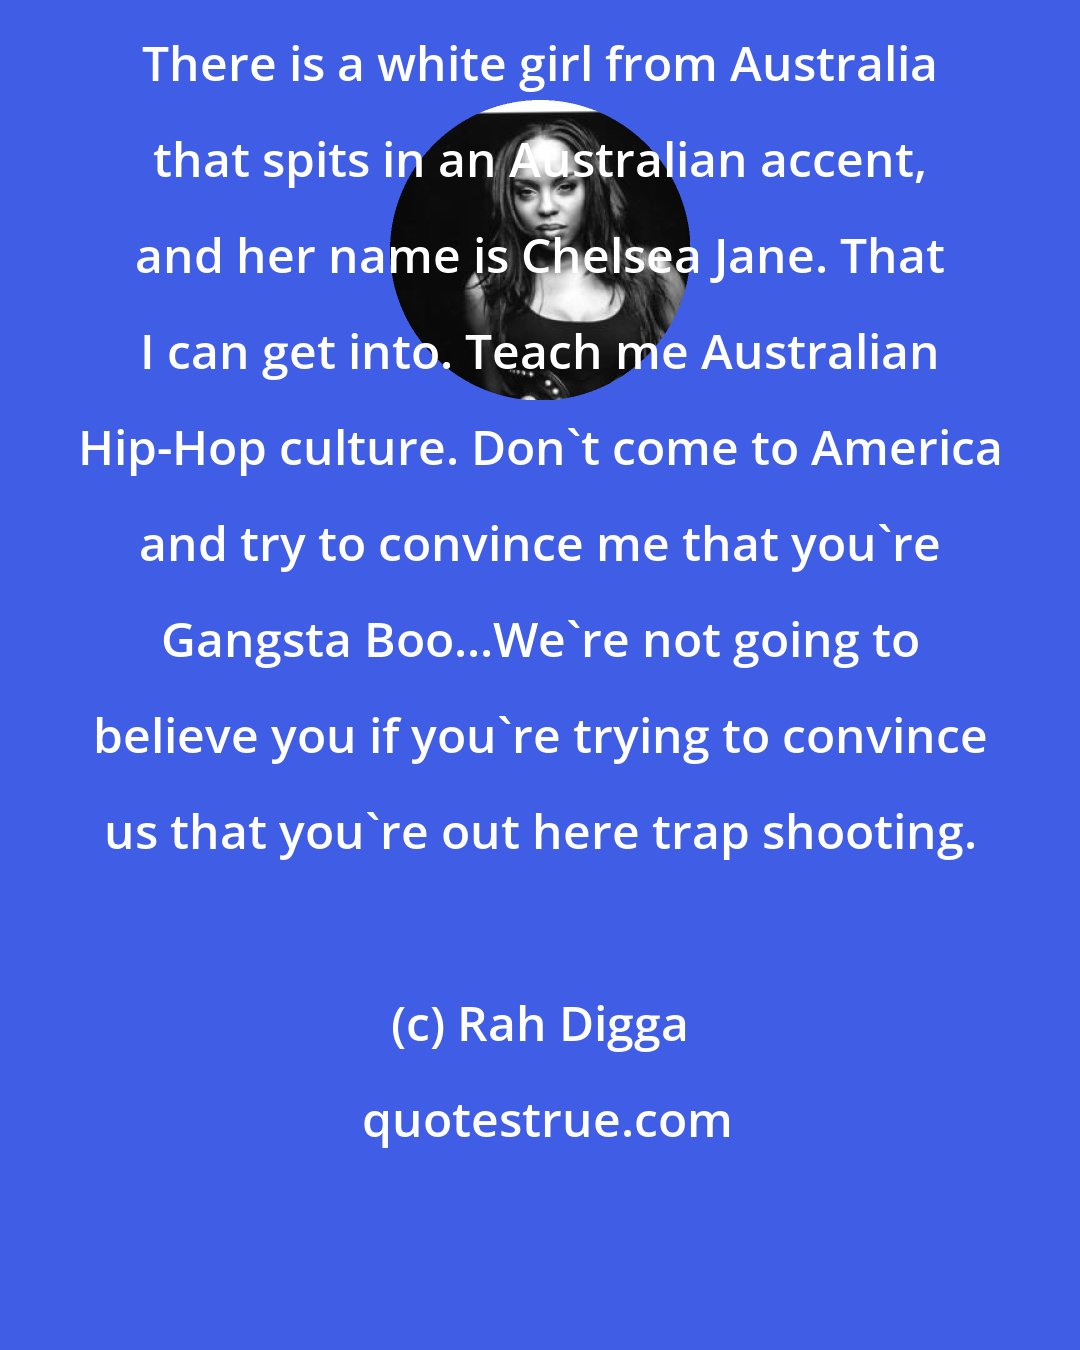 Rah Digga: There is a white girl from Australia that spits in an Australian accent, and her name is Chelsea Jane. That I can get into. Teach me Australian Hip-Hop culture. Don't come to America and try to convince me that you're Gangsta Boo...We're not going to believe you if you're trying to convince us that you're out here trap shooting.